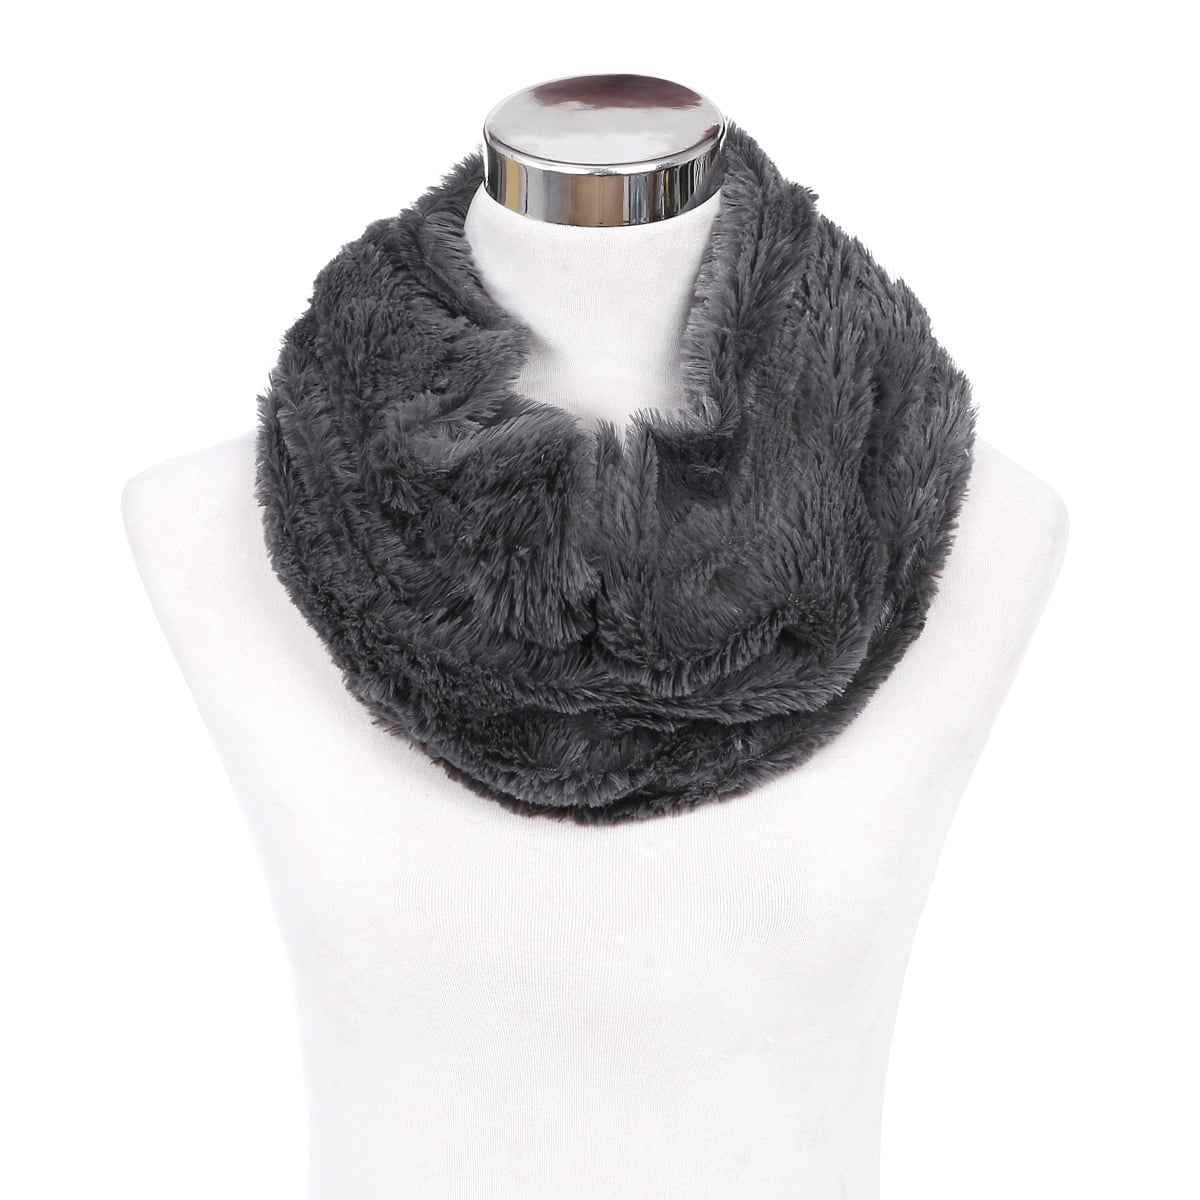 Premium Soft Small Faux Fur Solid Color Warm Infinity Circle Scarf Diff Colors 